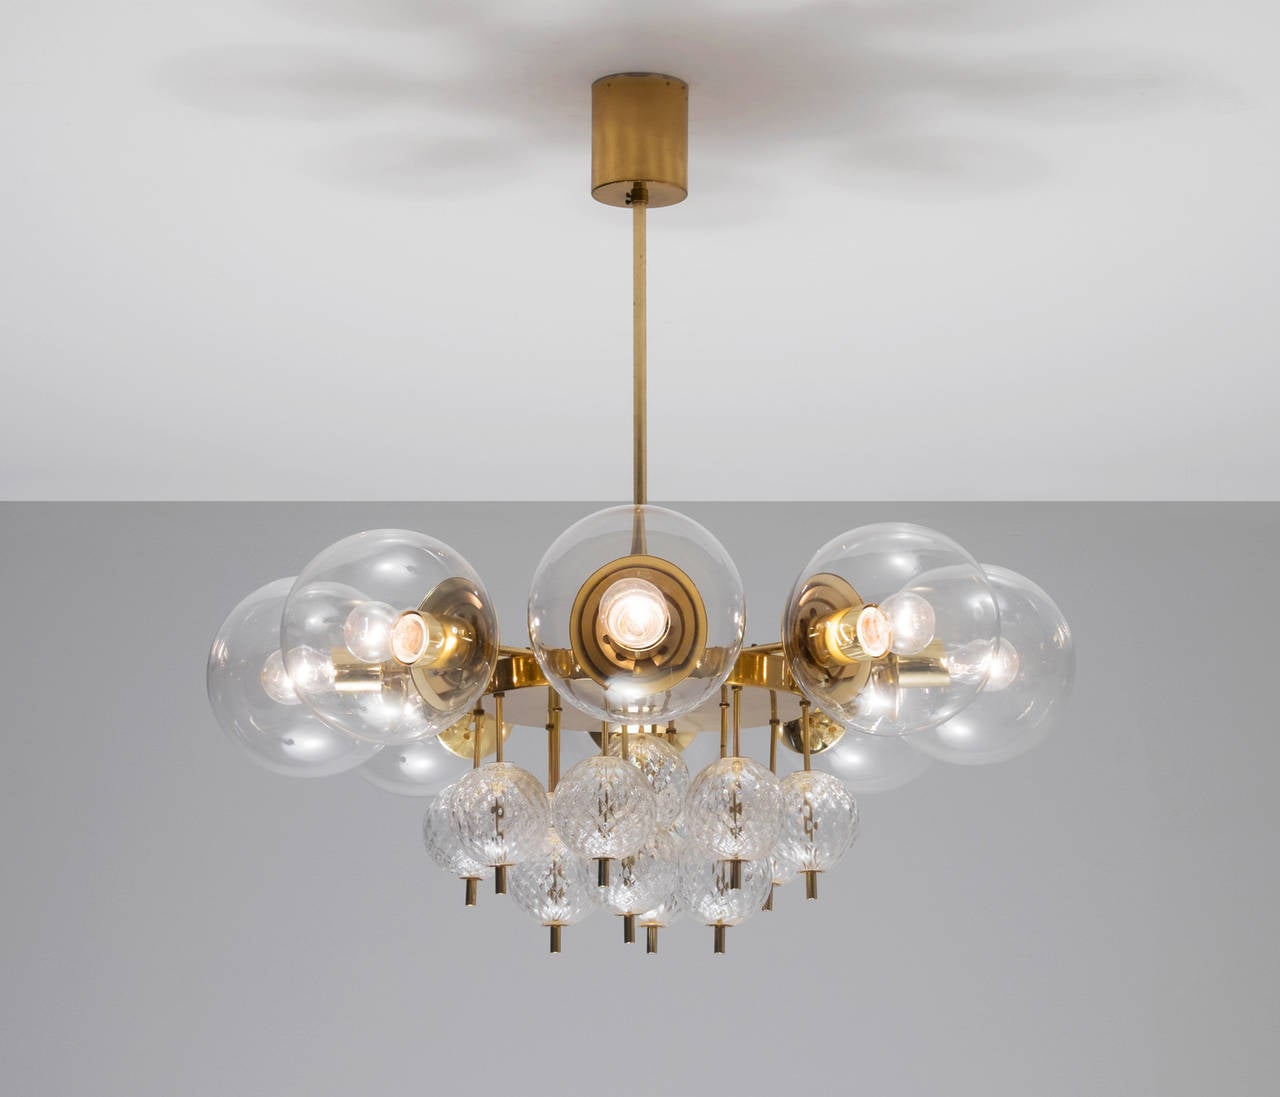 Large brass chandelier with beautiful glass bulbs, 1960s. 

This lights were found in the very south of the Czech Republic, so most likely from Austrian production seen their excellent quality with which they have been manufactured. Eight large